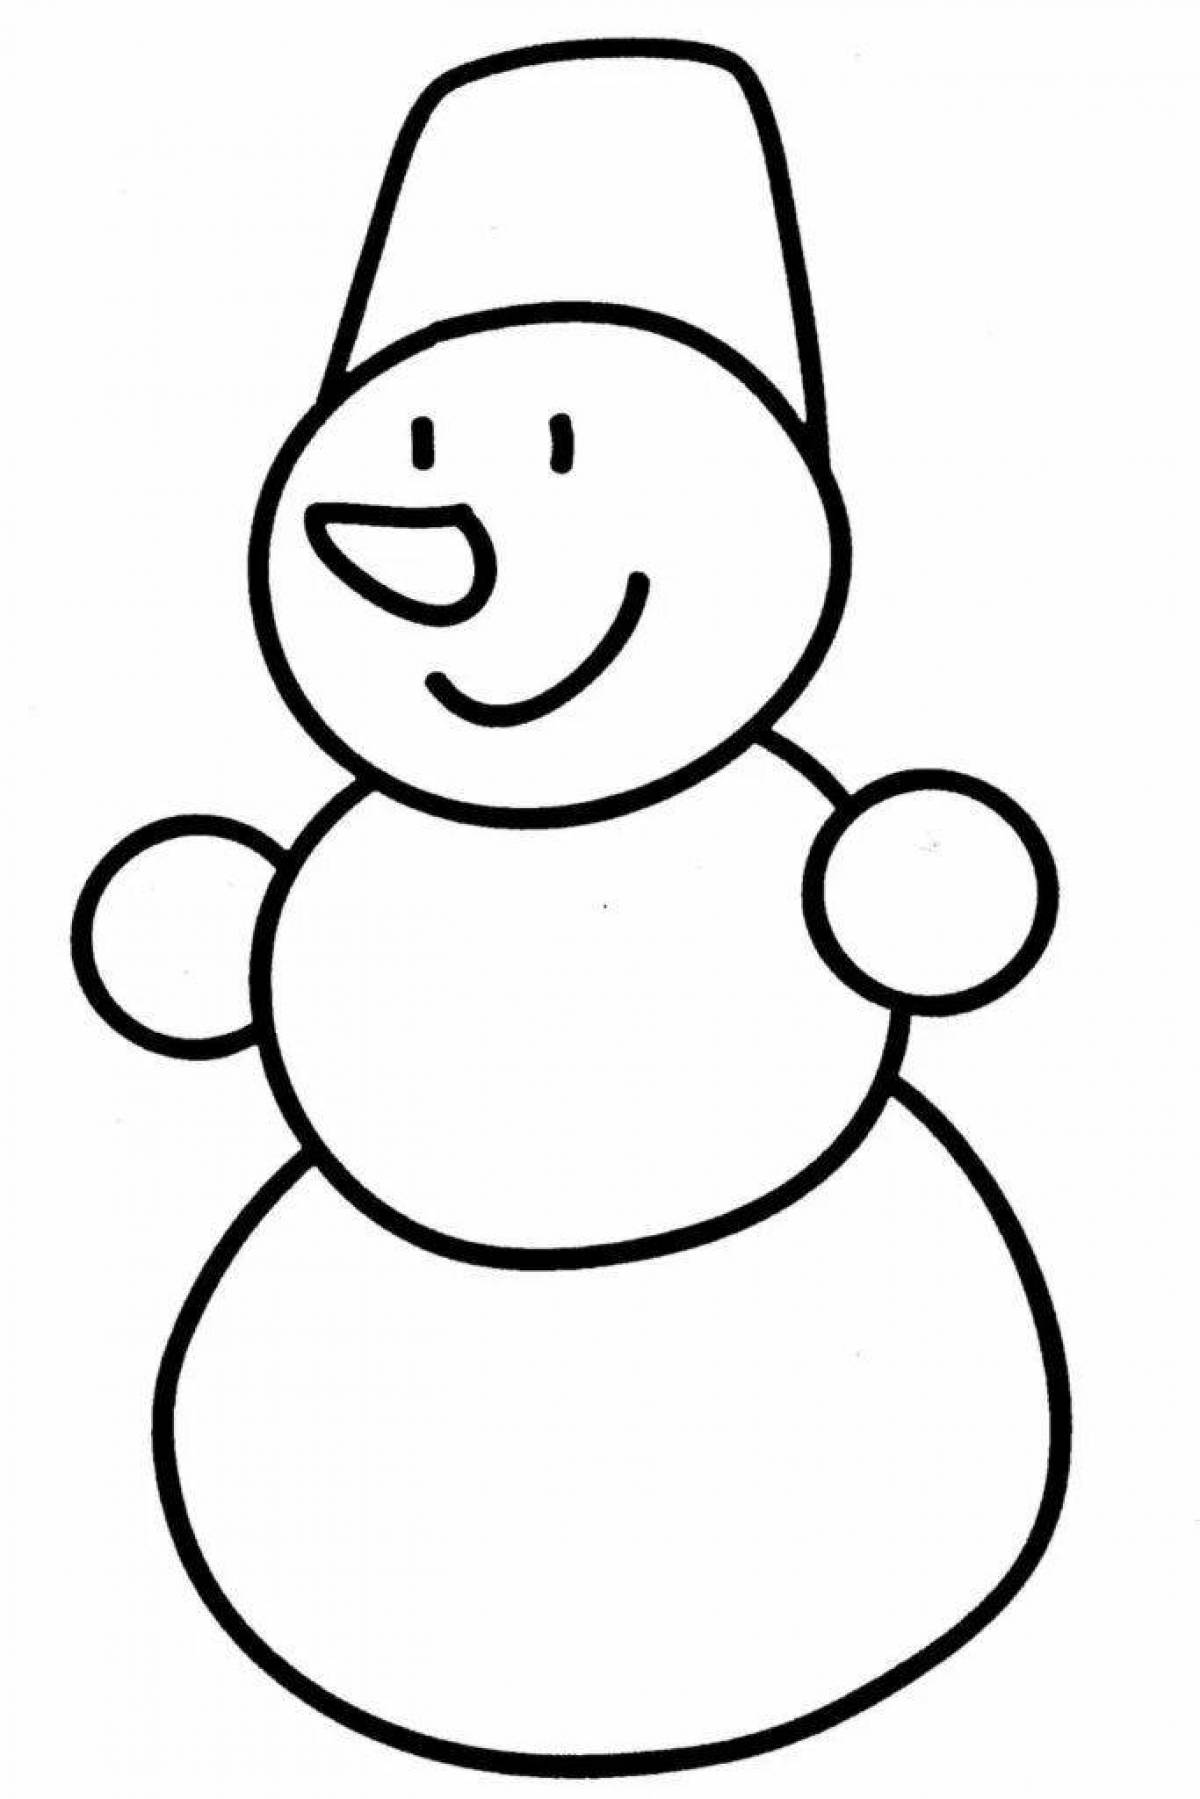 Playful Christmas coloring book for toddlers